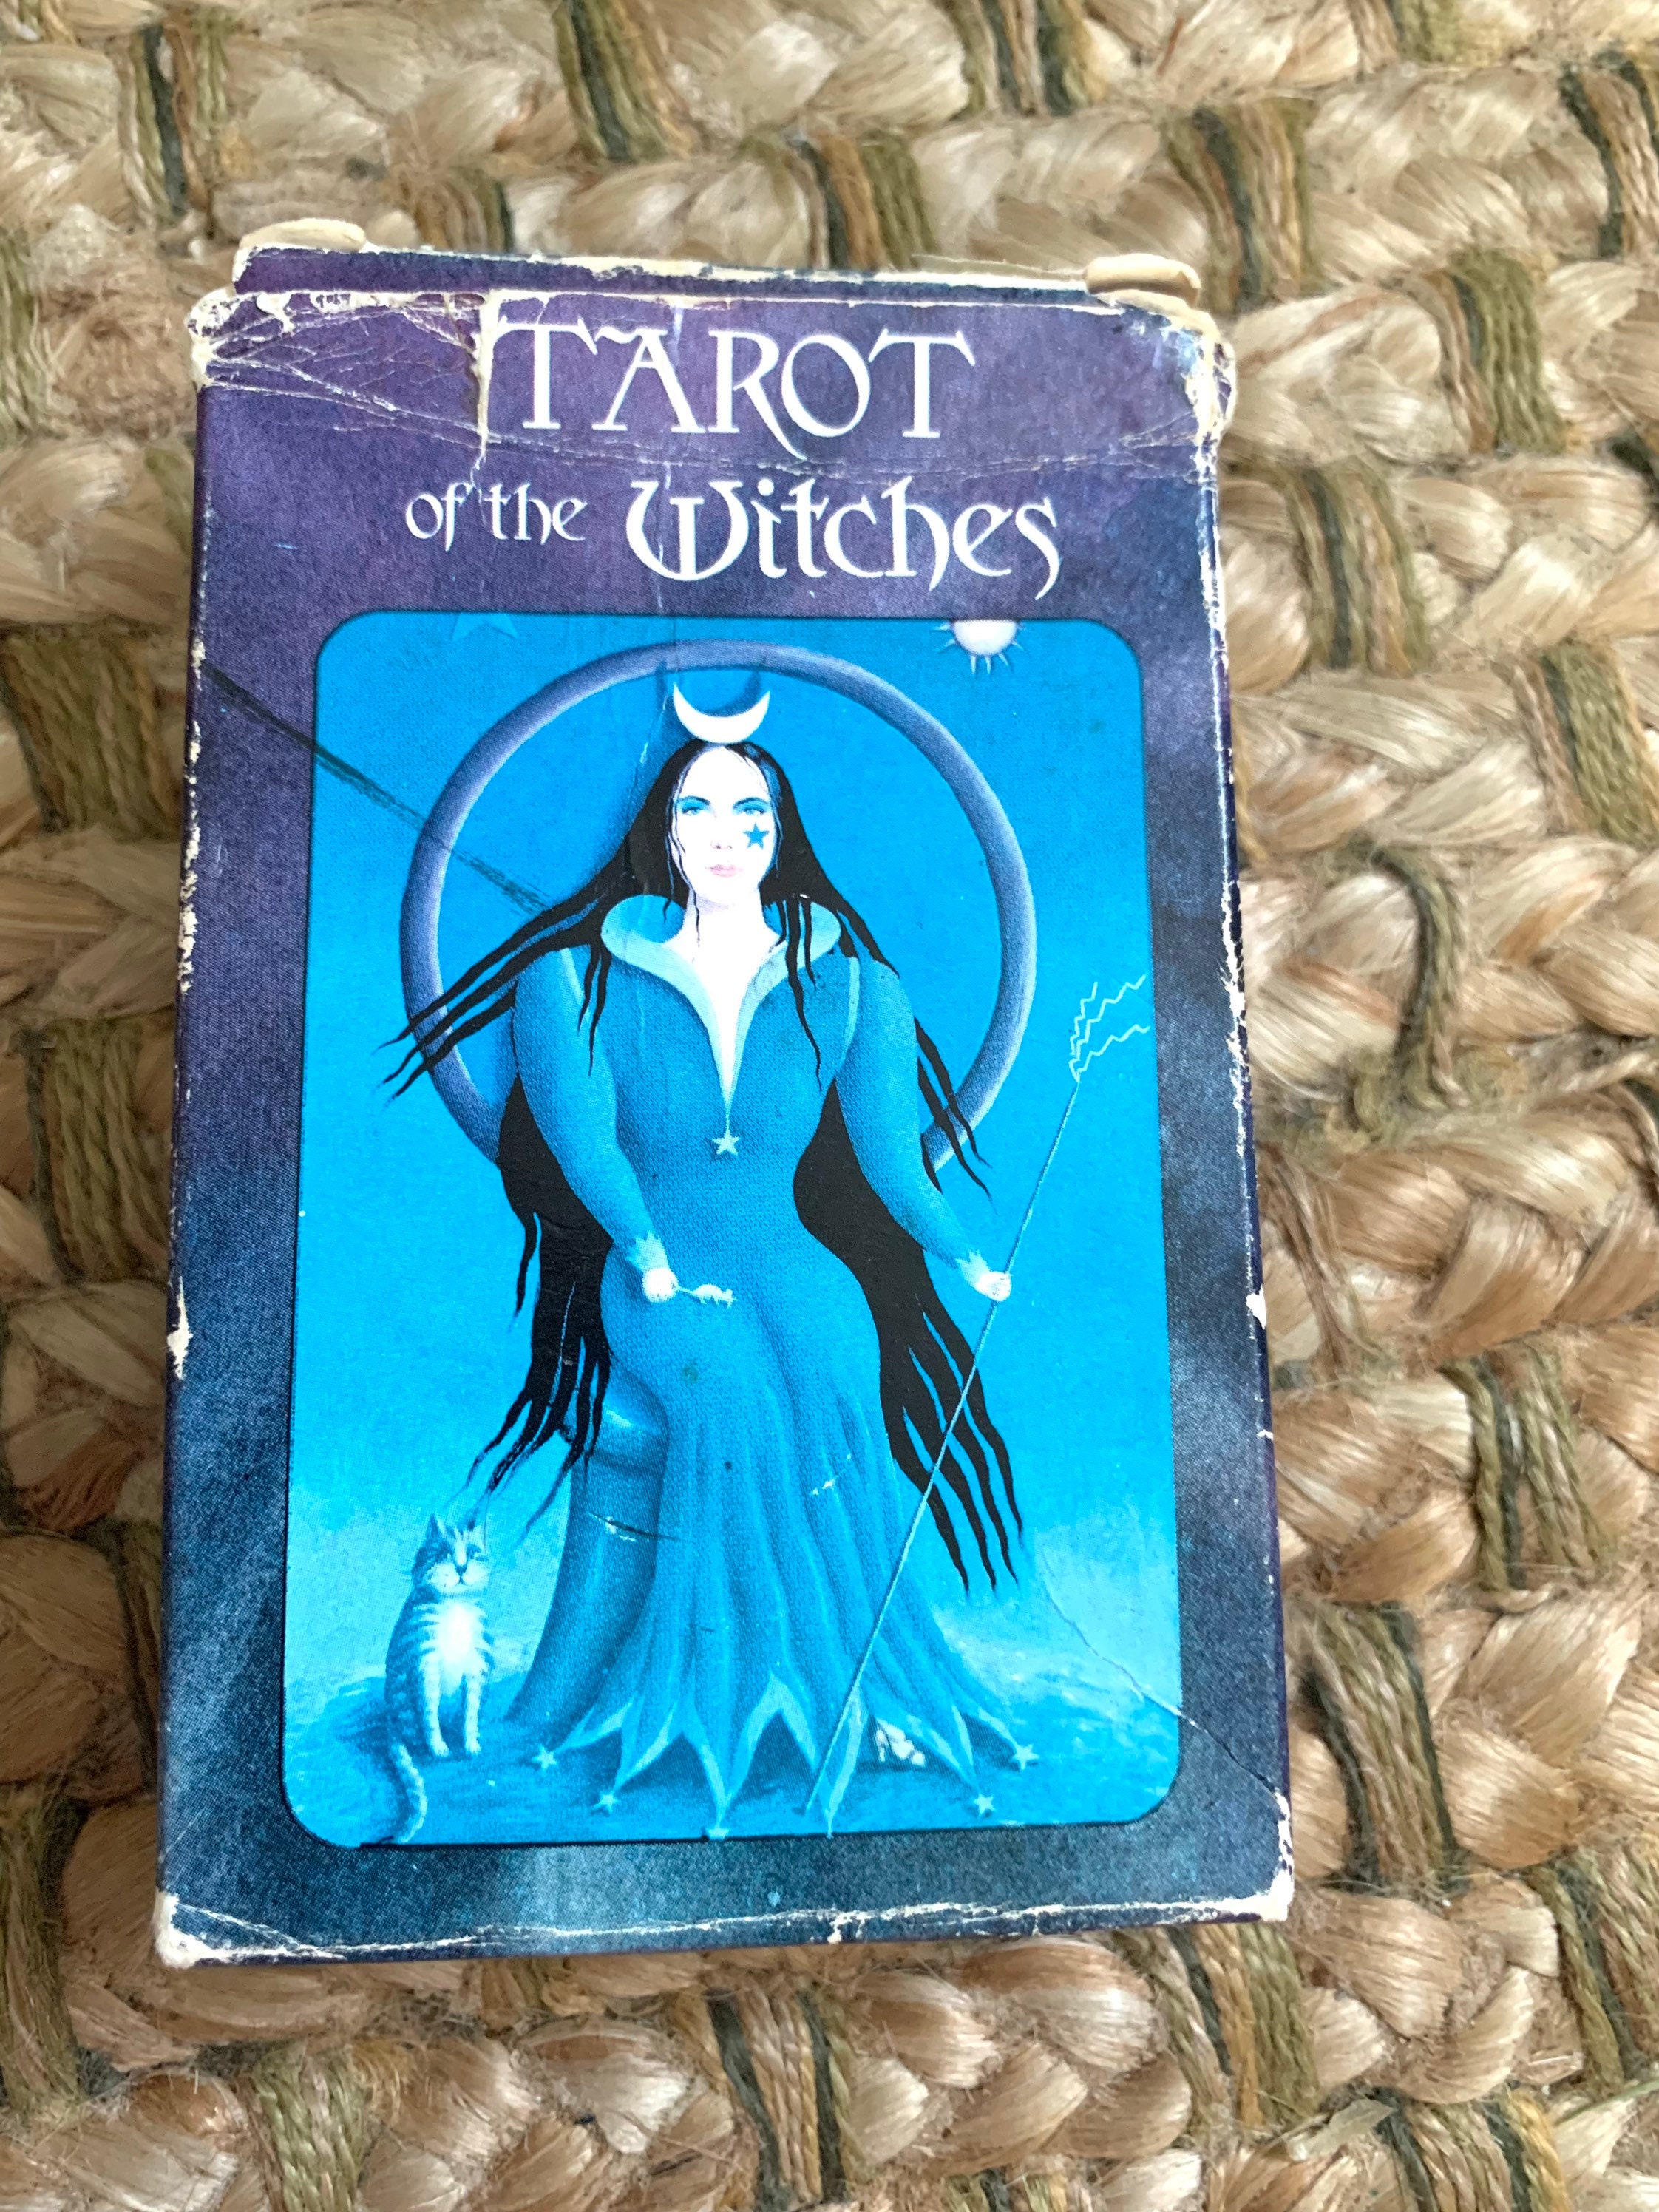 Engel travl Allergi Tarot of the Witches by Fergus Hall 1973 - Etsy